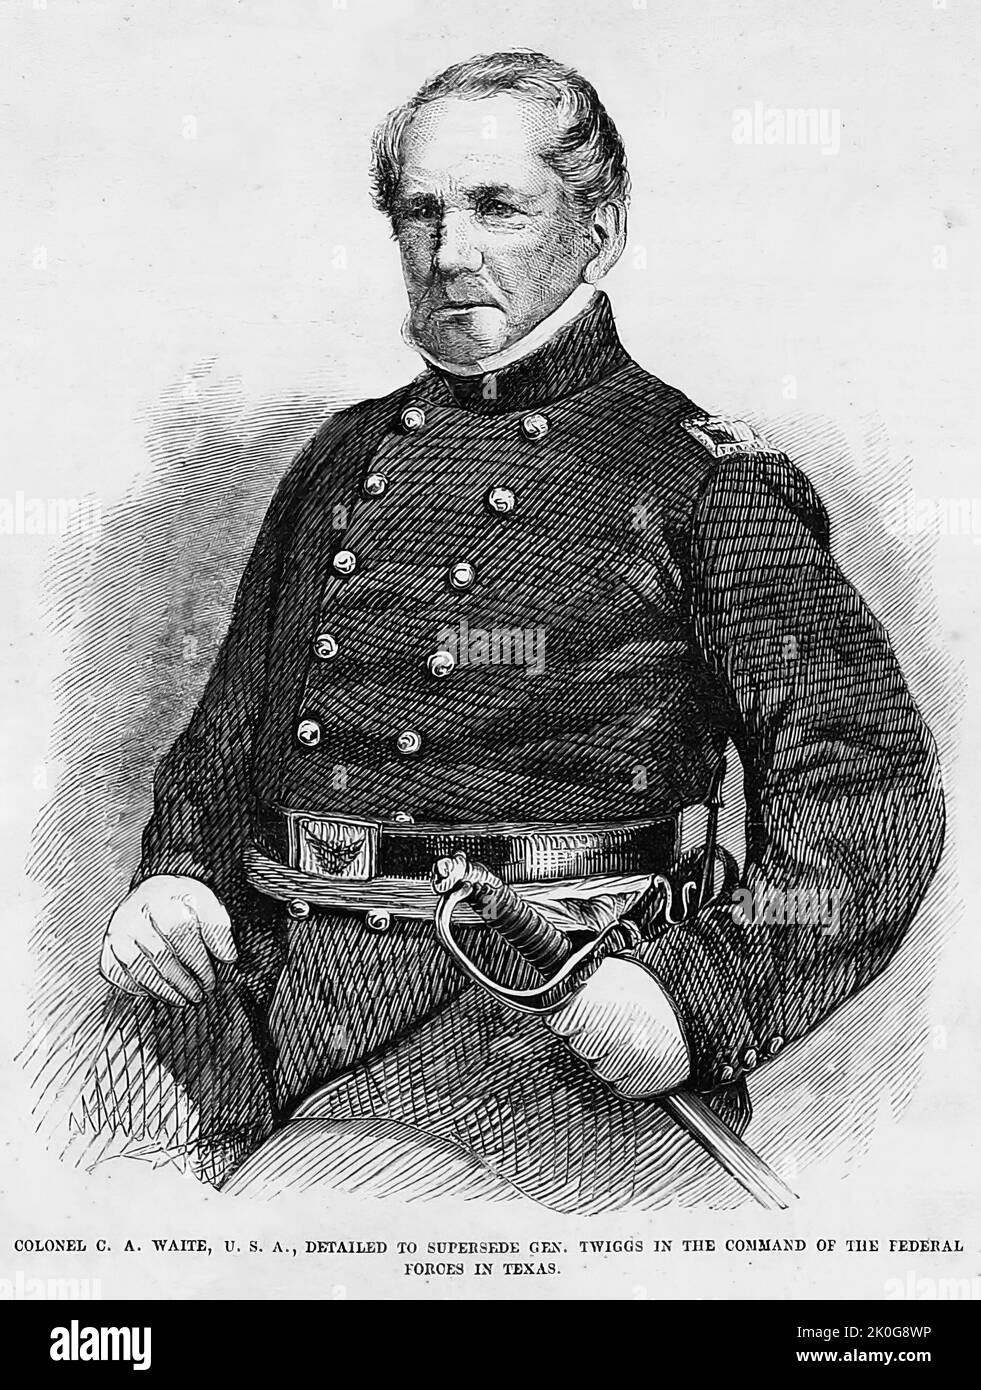 Portrait of Colonel Carlos Adolphus Waite, detailed to supersede General David Emanuel Twiggs in the command of the Federal forces in Texas. July 1861. 19th century American Civil War illustration from Frank Leslie's Illustrated Newspaper Stock Photo